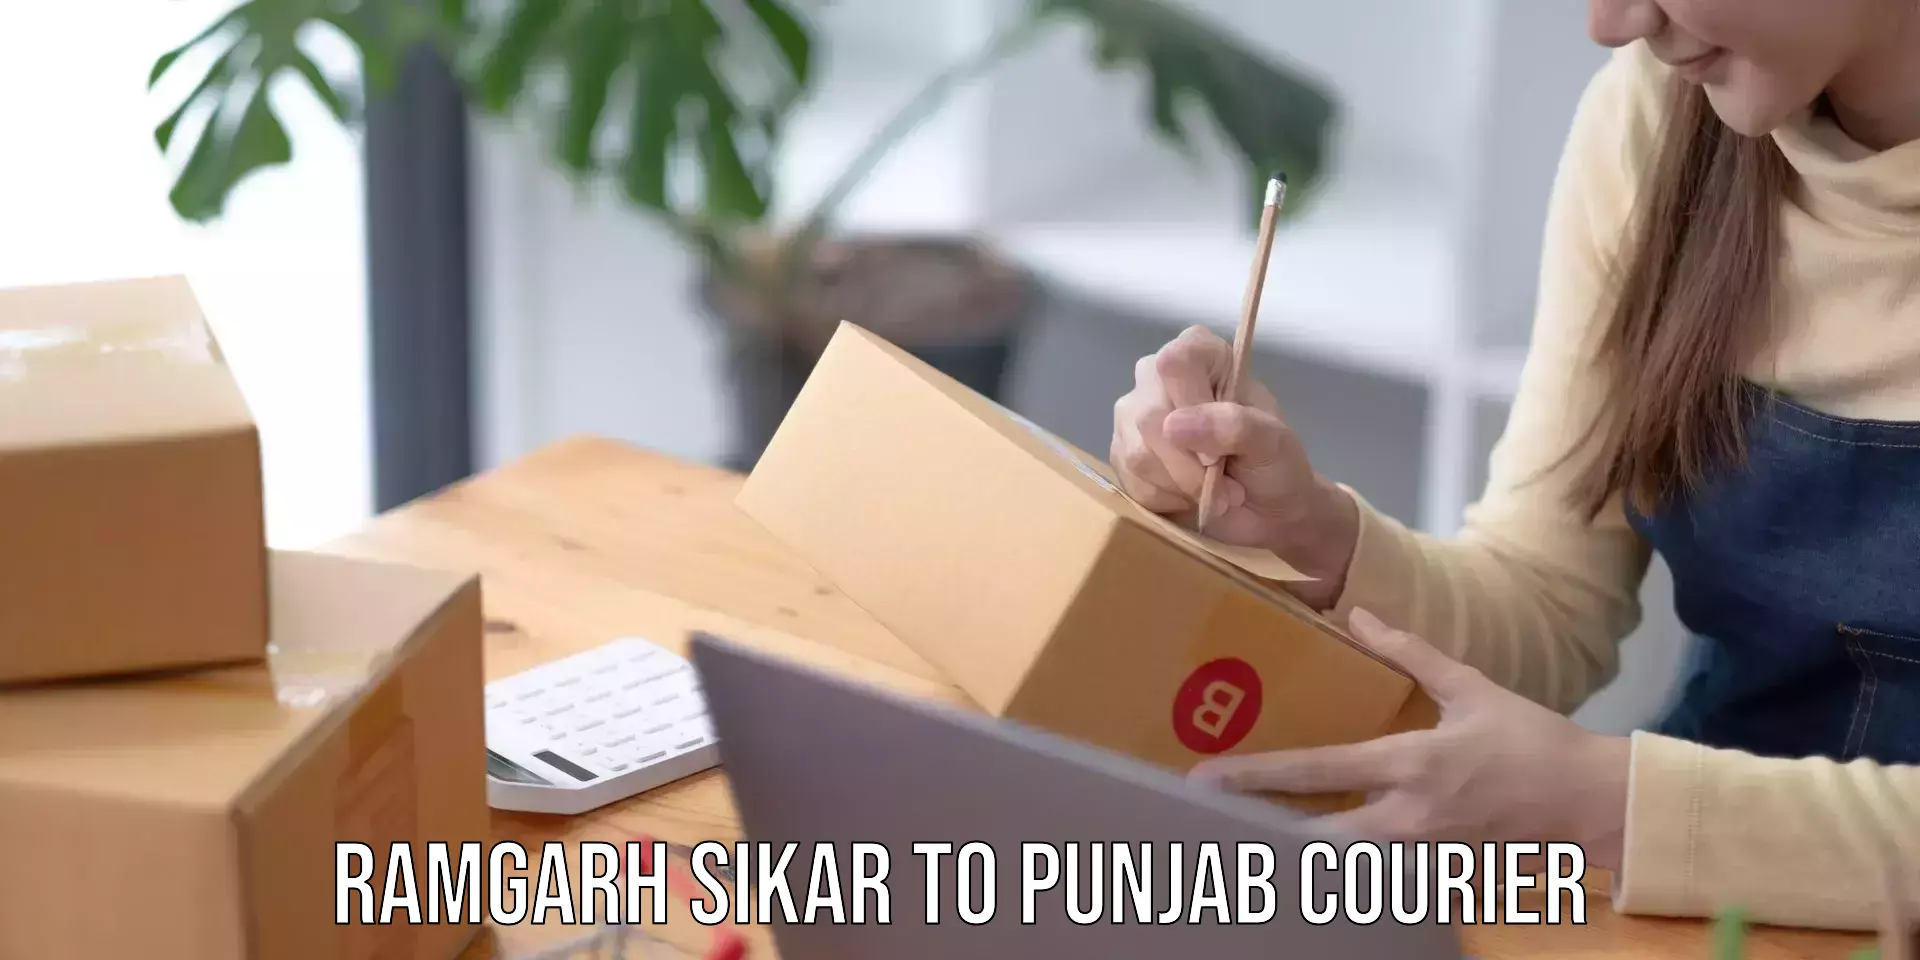 Courier service booking Ramgarh Sikar to Punjab